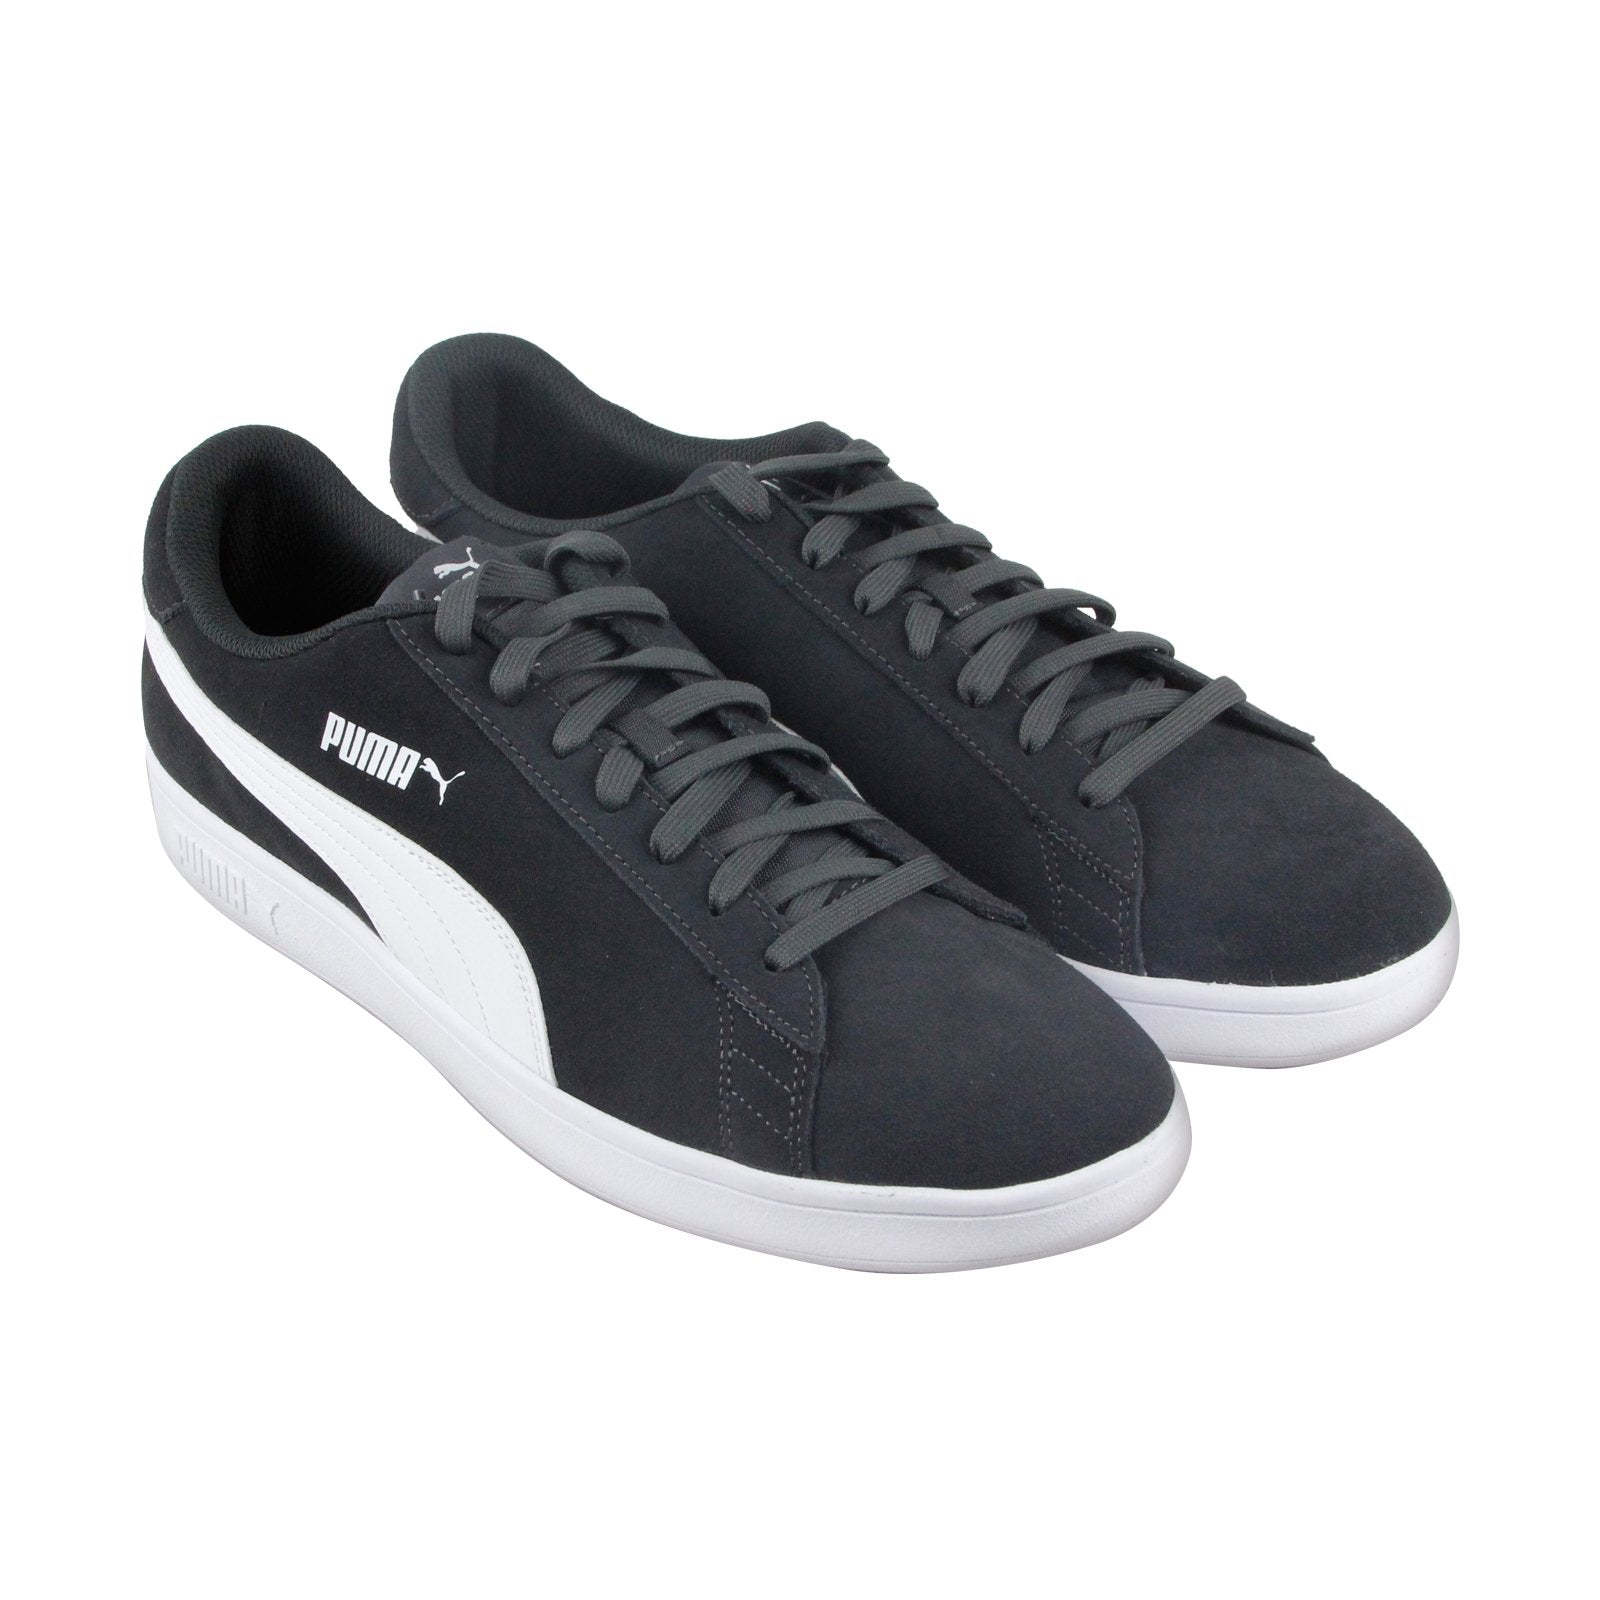 Puma Smash V2 36498905 Mens Gray Suede Lace Up Lifestyle Sneakers Shoe ...